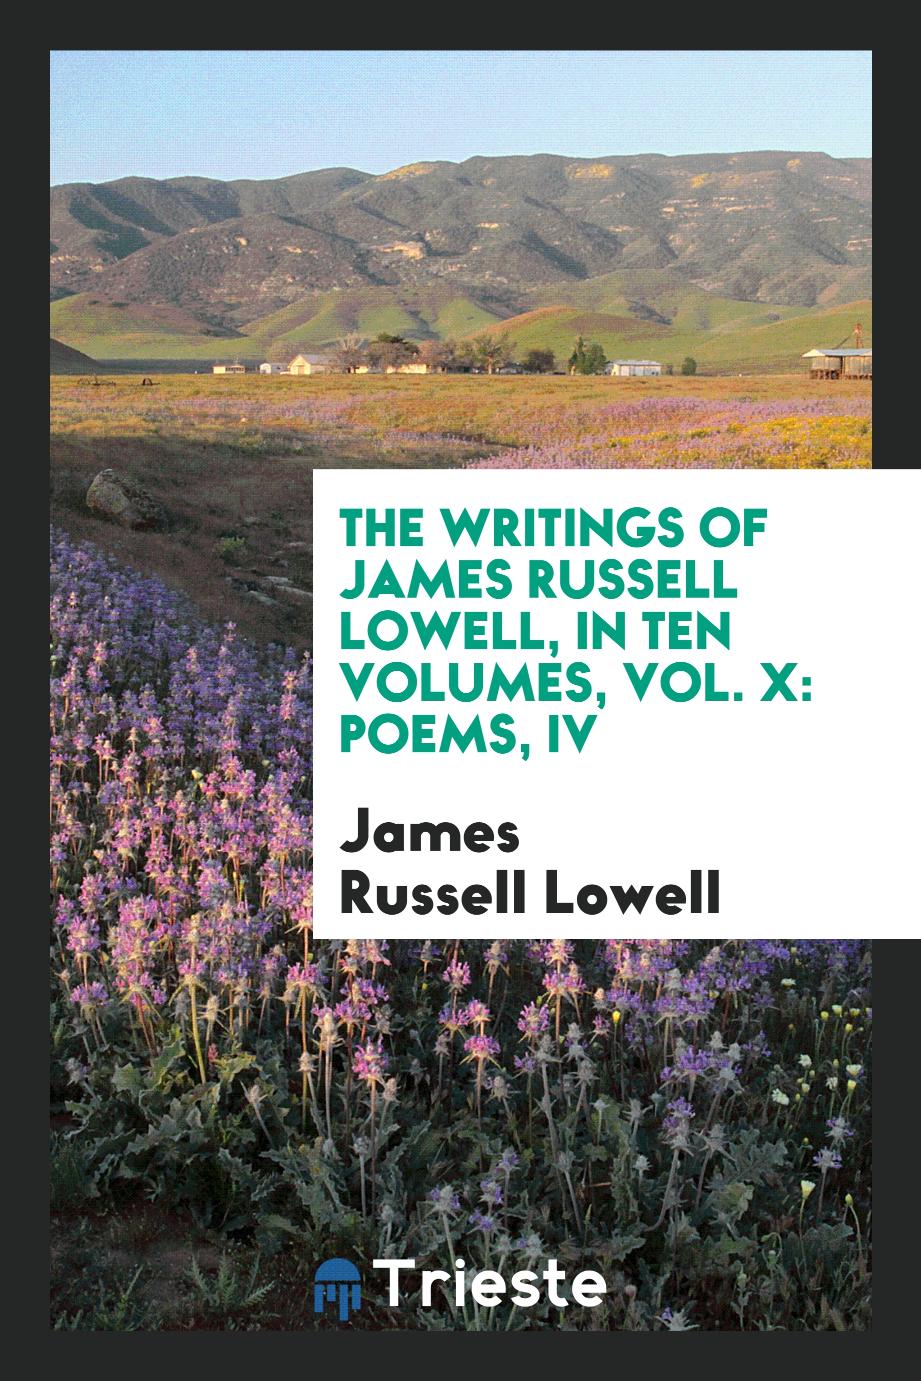 The writings of James Russell Lowell, in ten volumes, Vol. X: Poems, IV